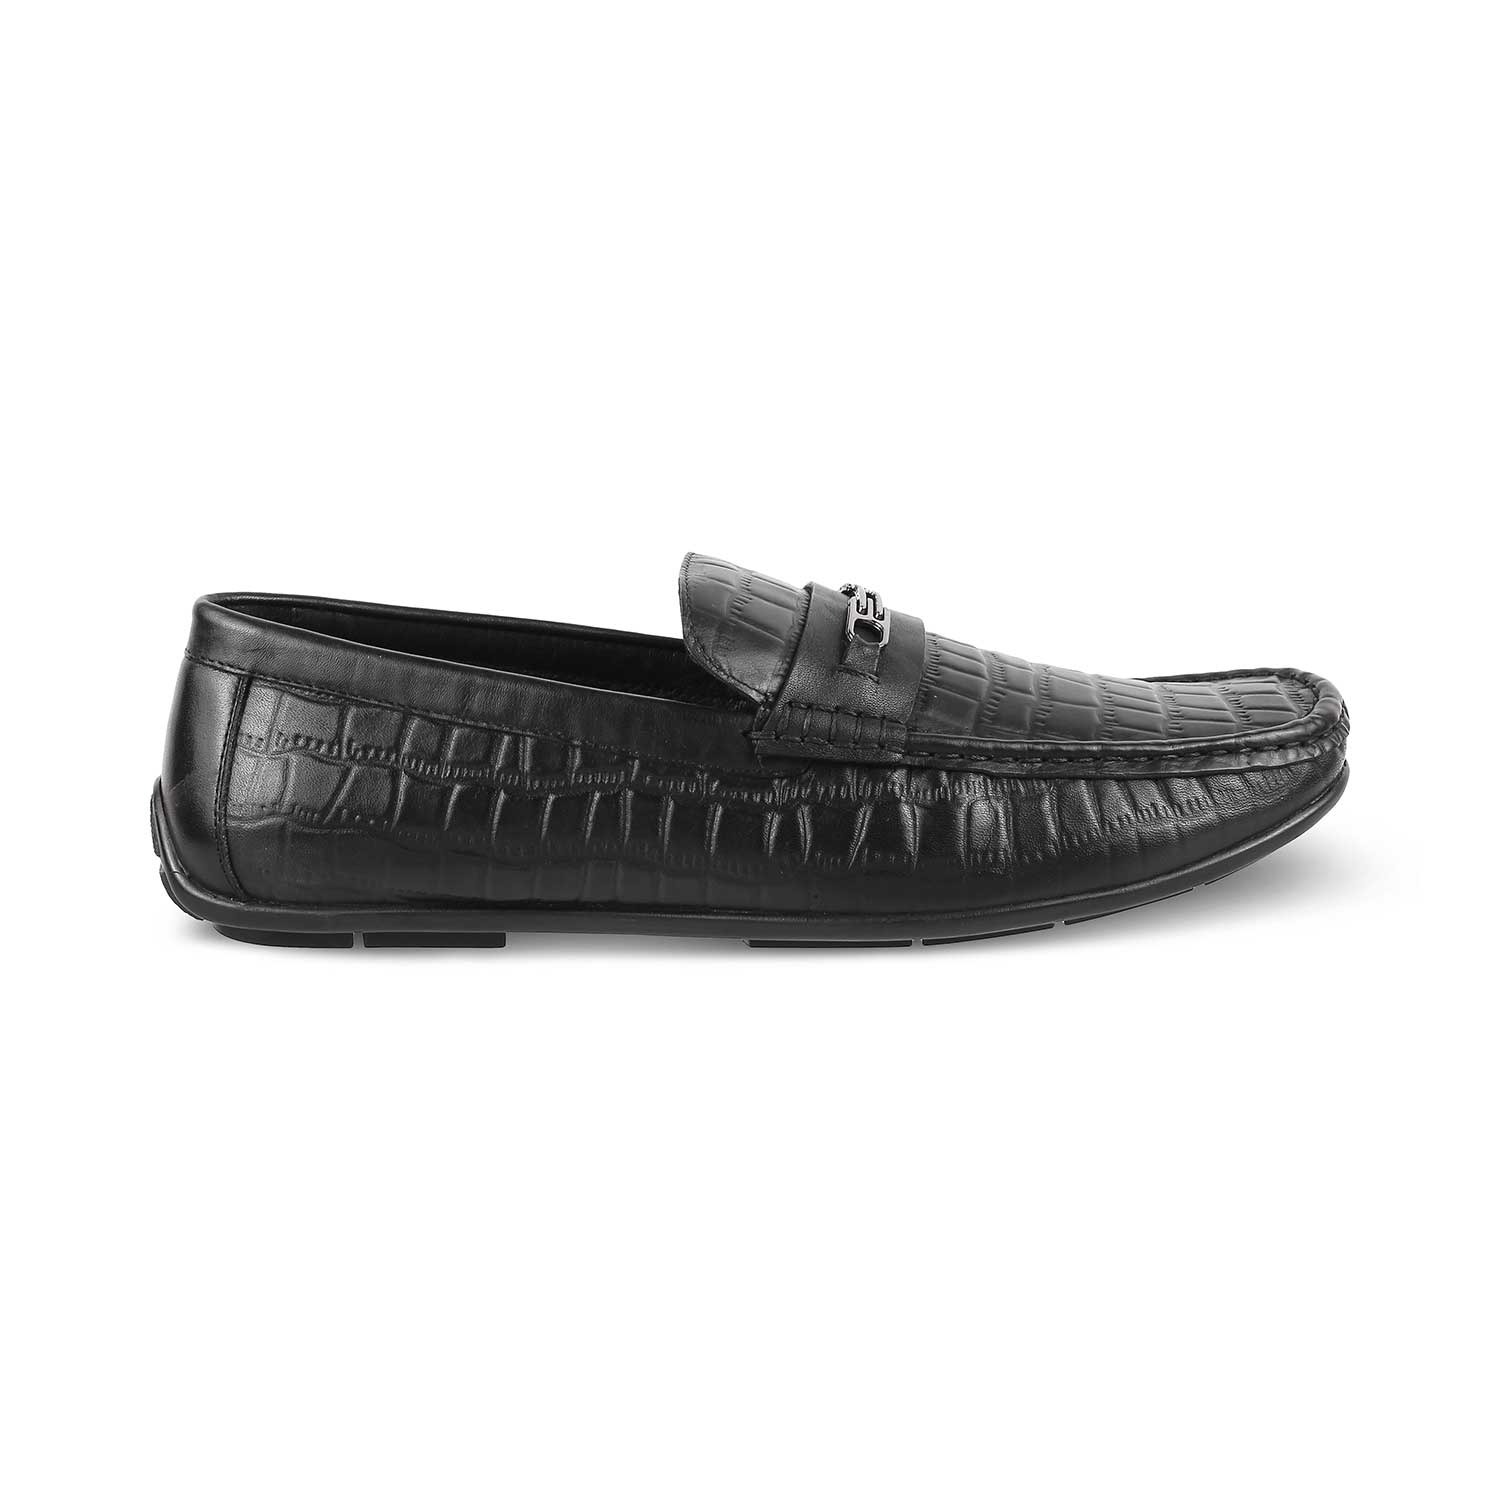 Tresmode-The York Black Men's Leather Driving Loafers Tresmode-Tresmode